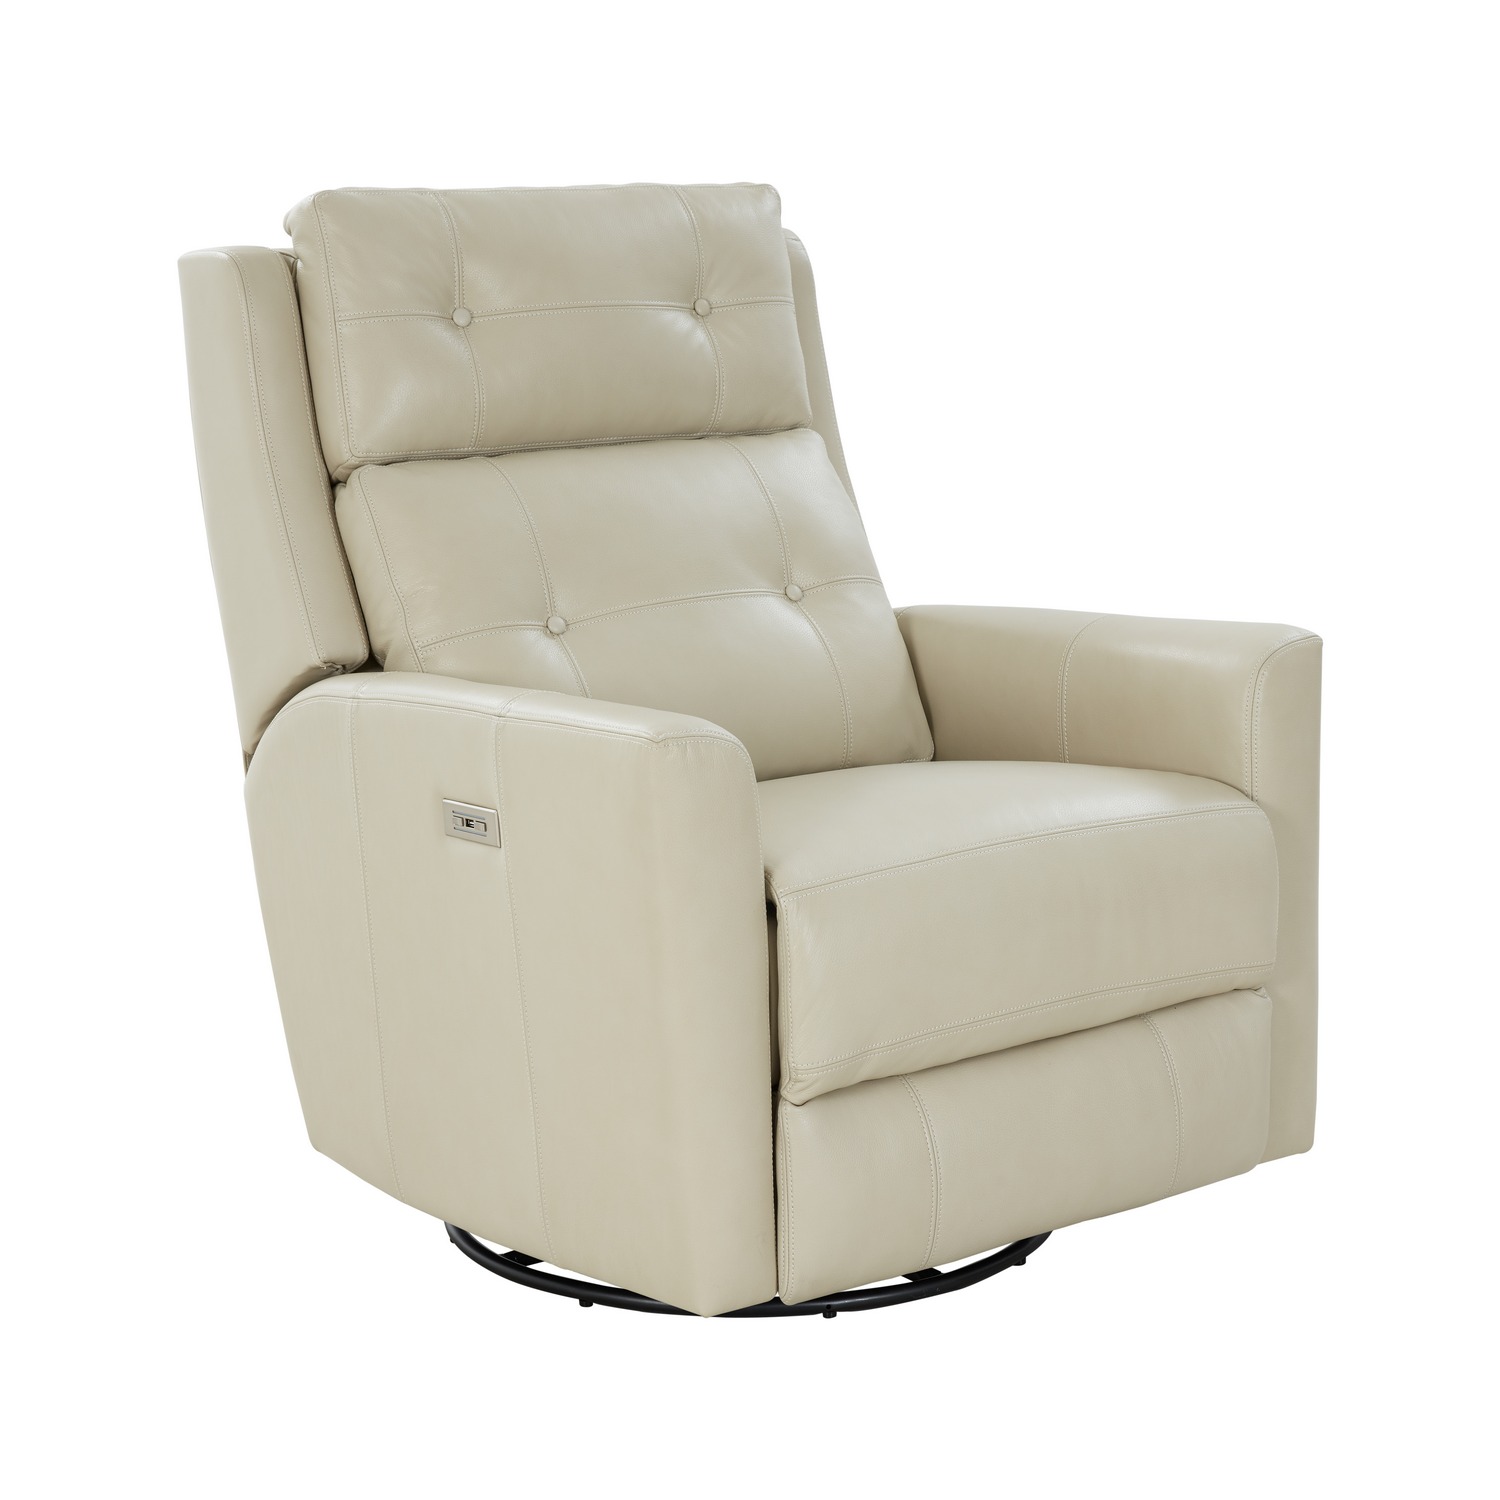 Barcalounger Marconi Power Swivel Glider Recliner Chair with Power Head Rest - Barone Parchment/All Leather